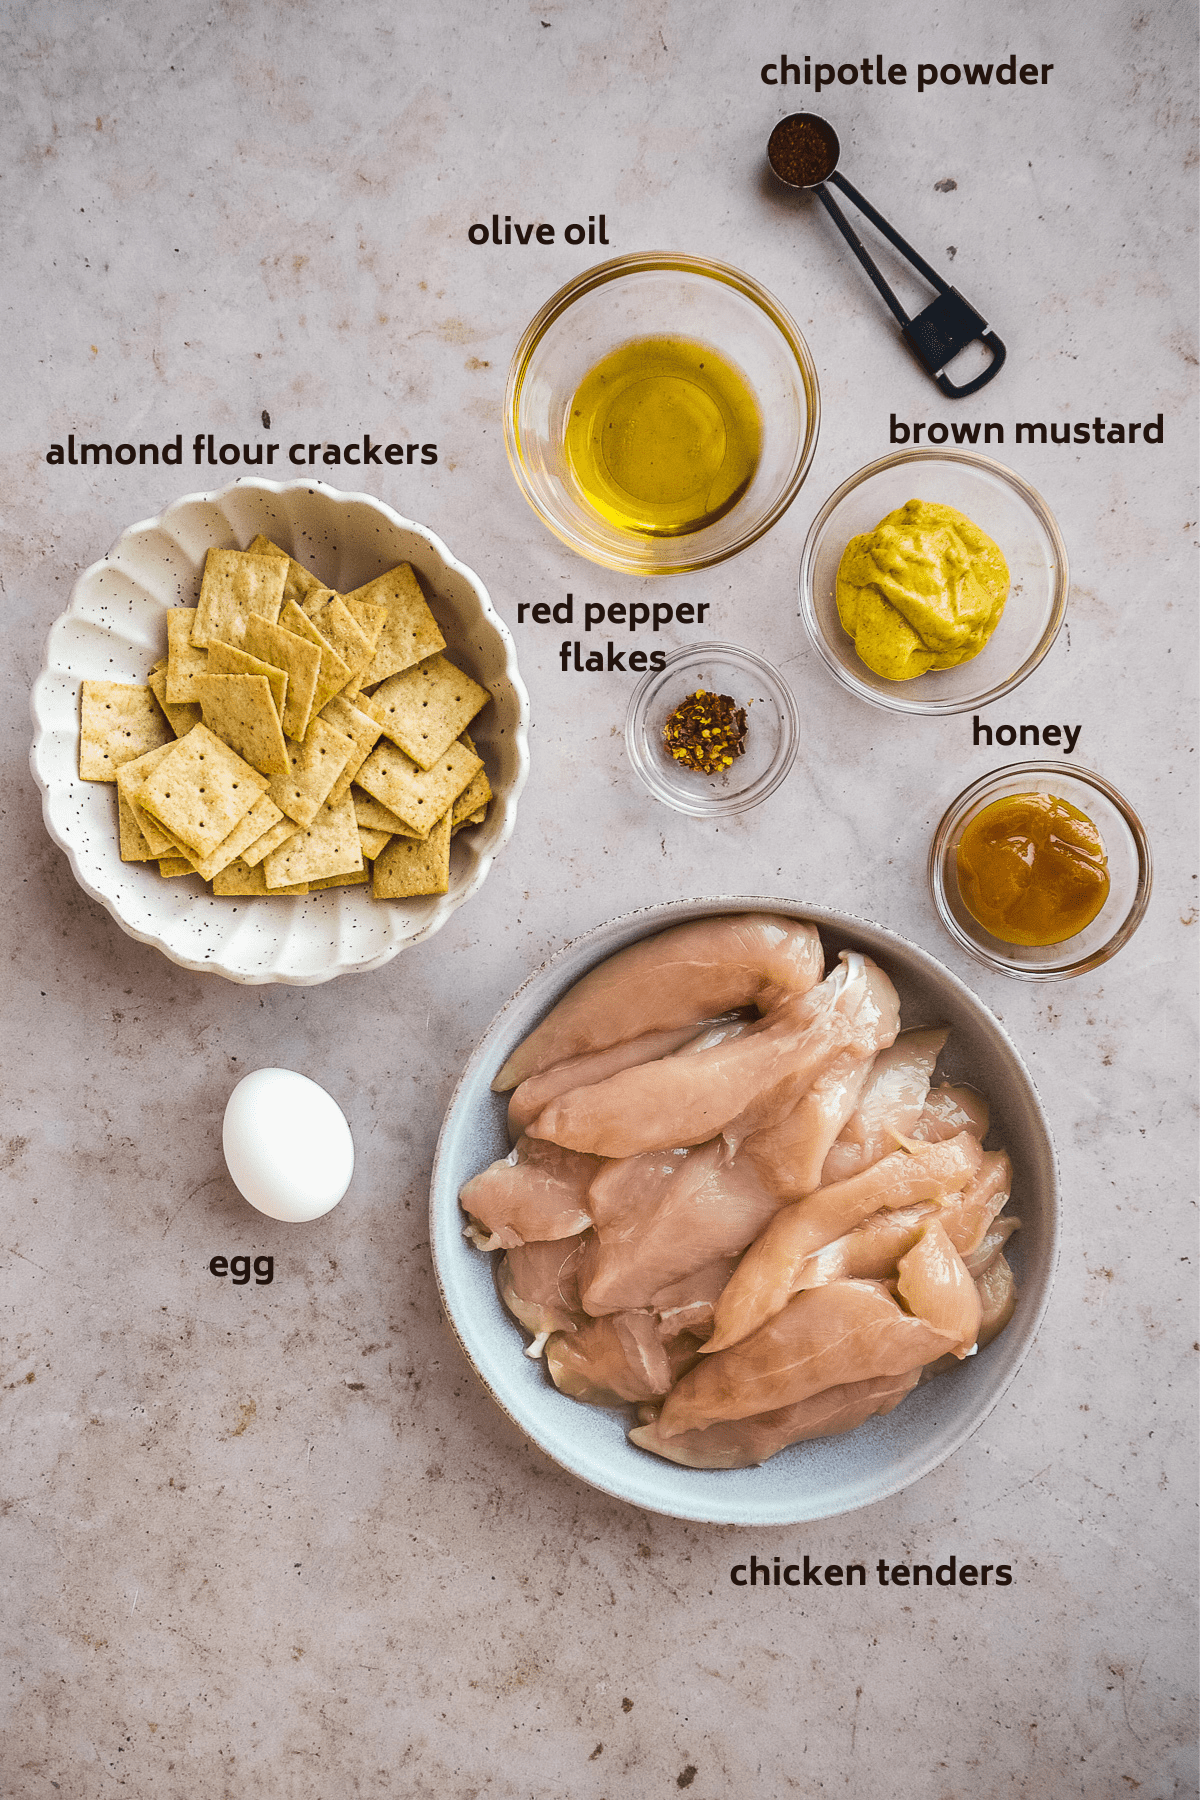 Chicken tender ingredients on a gray surface.